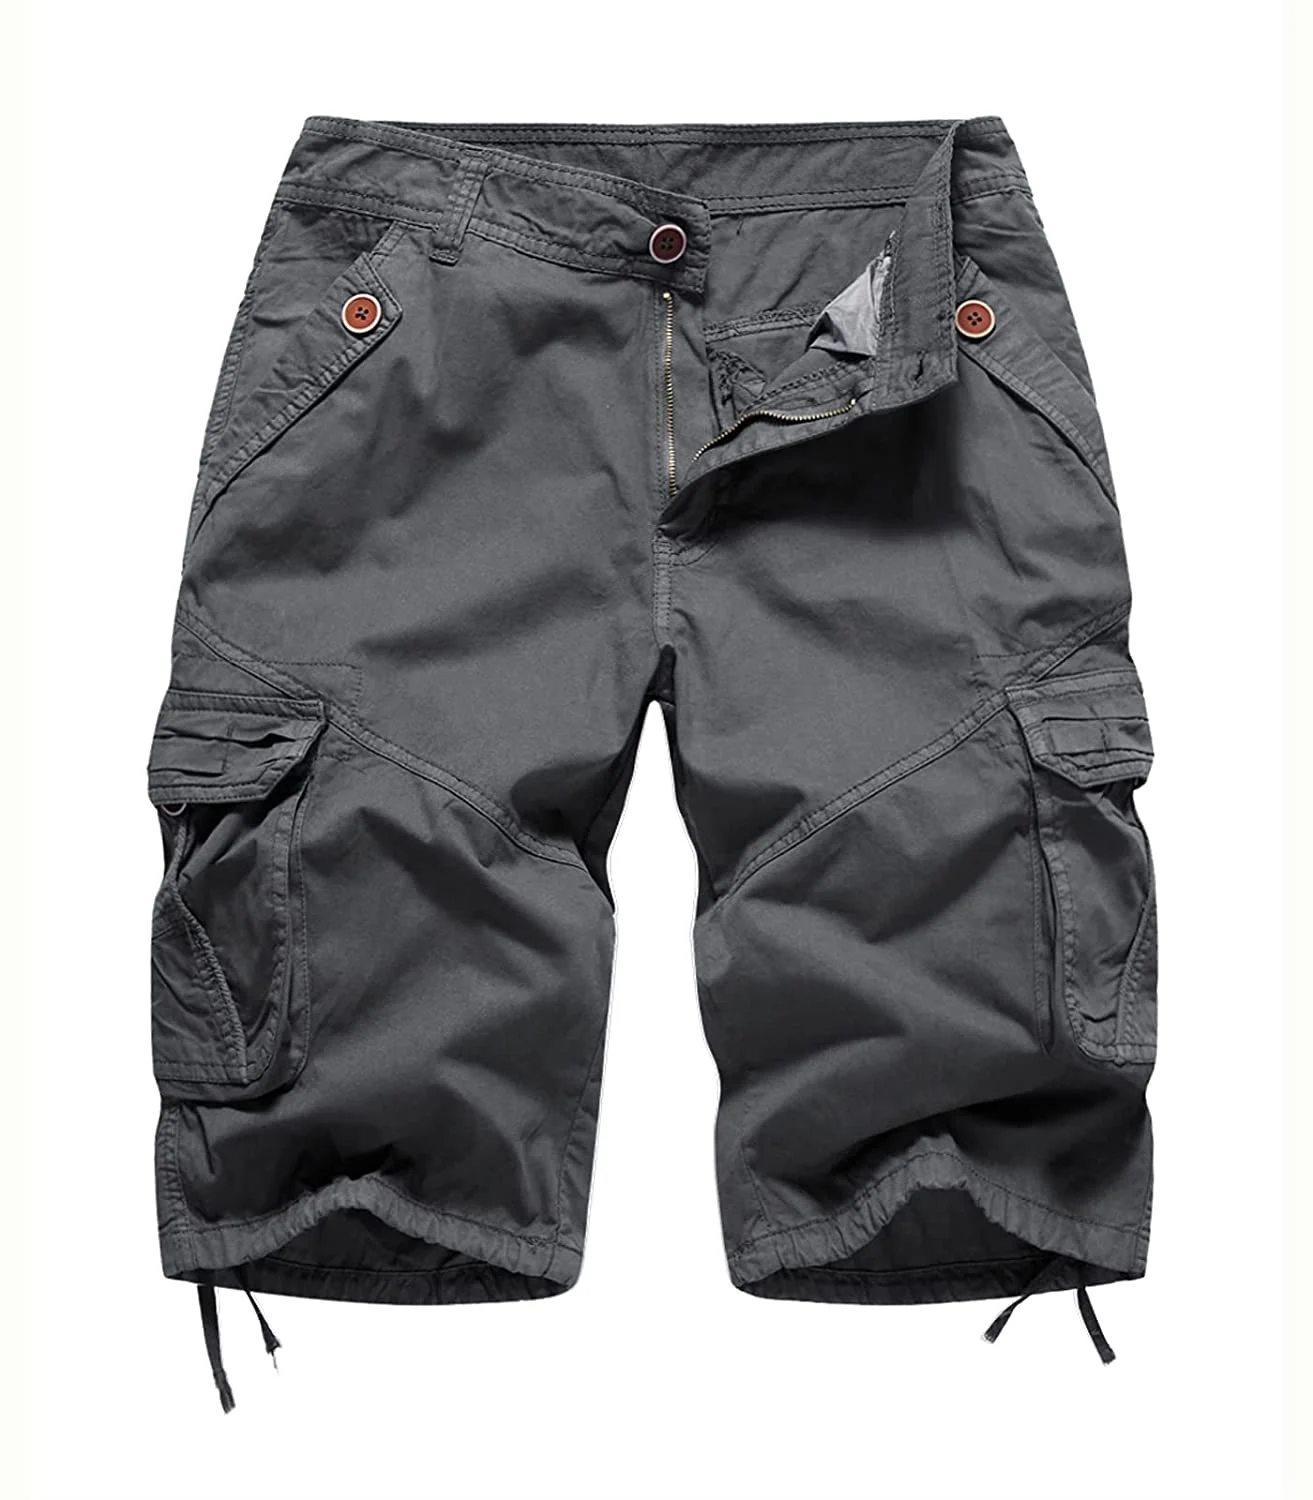 Mens Relaxed Fit Ripstop Cargo Short From Bangladesh Garments Factory